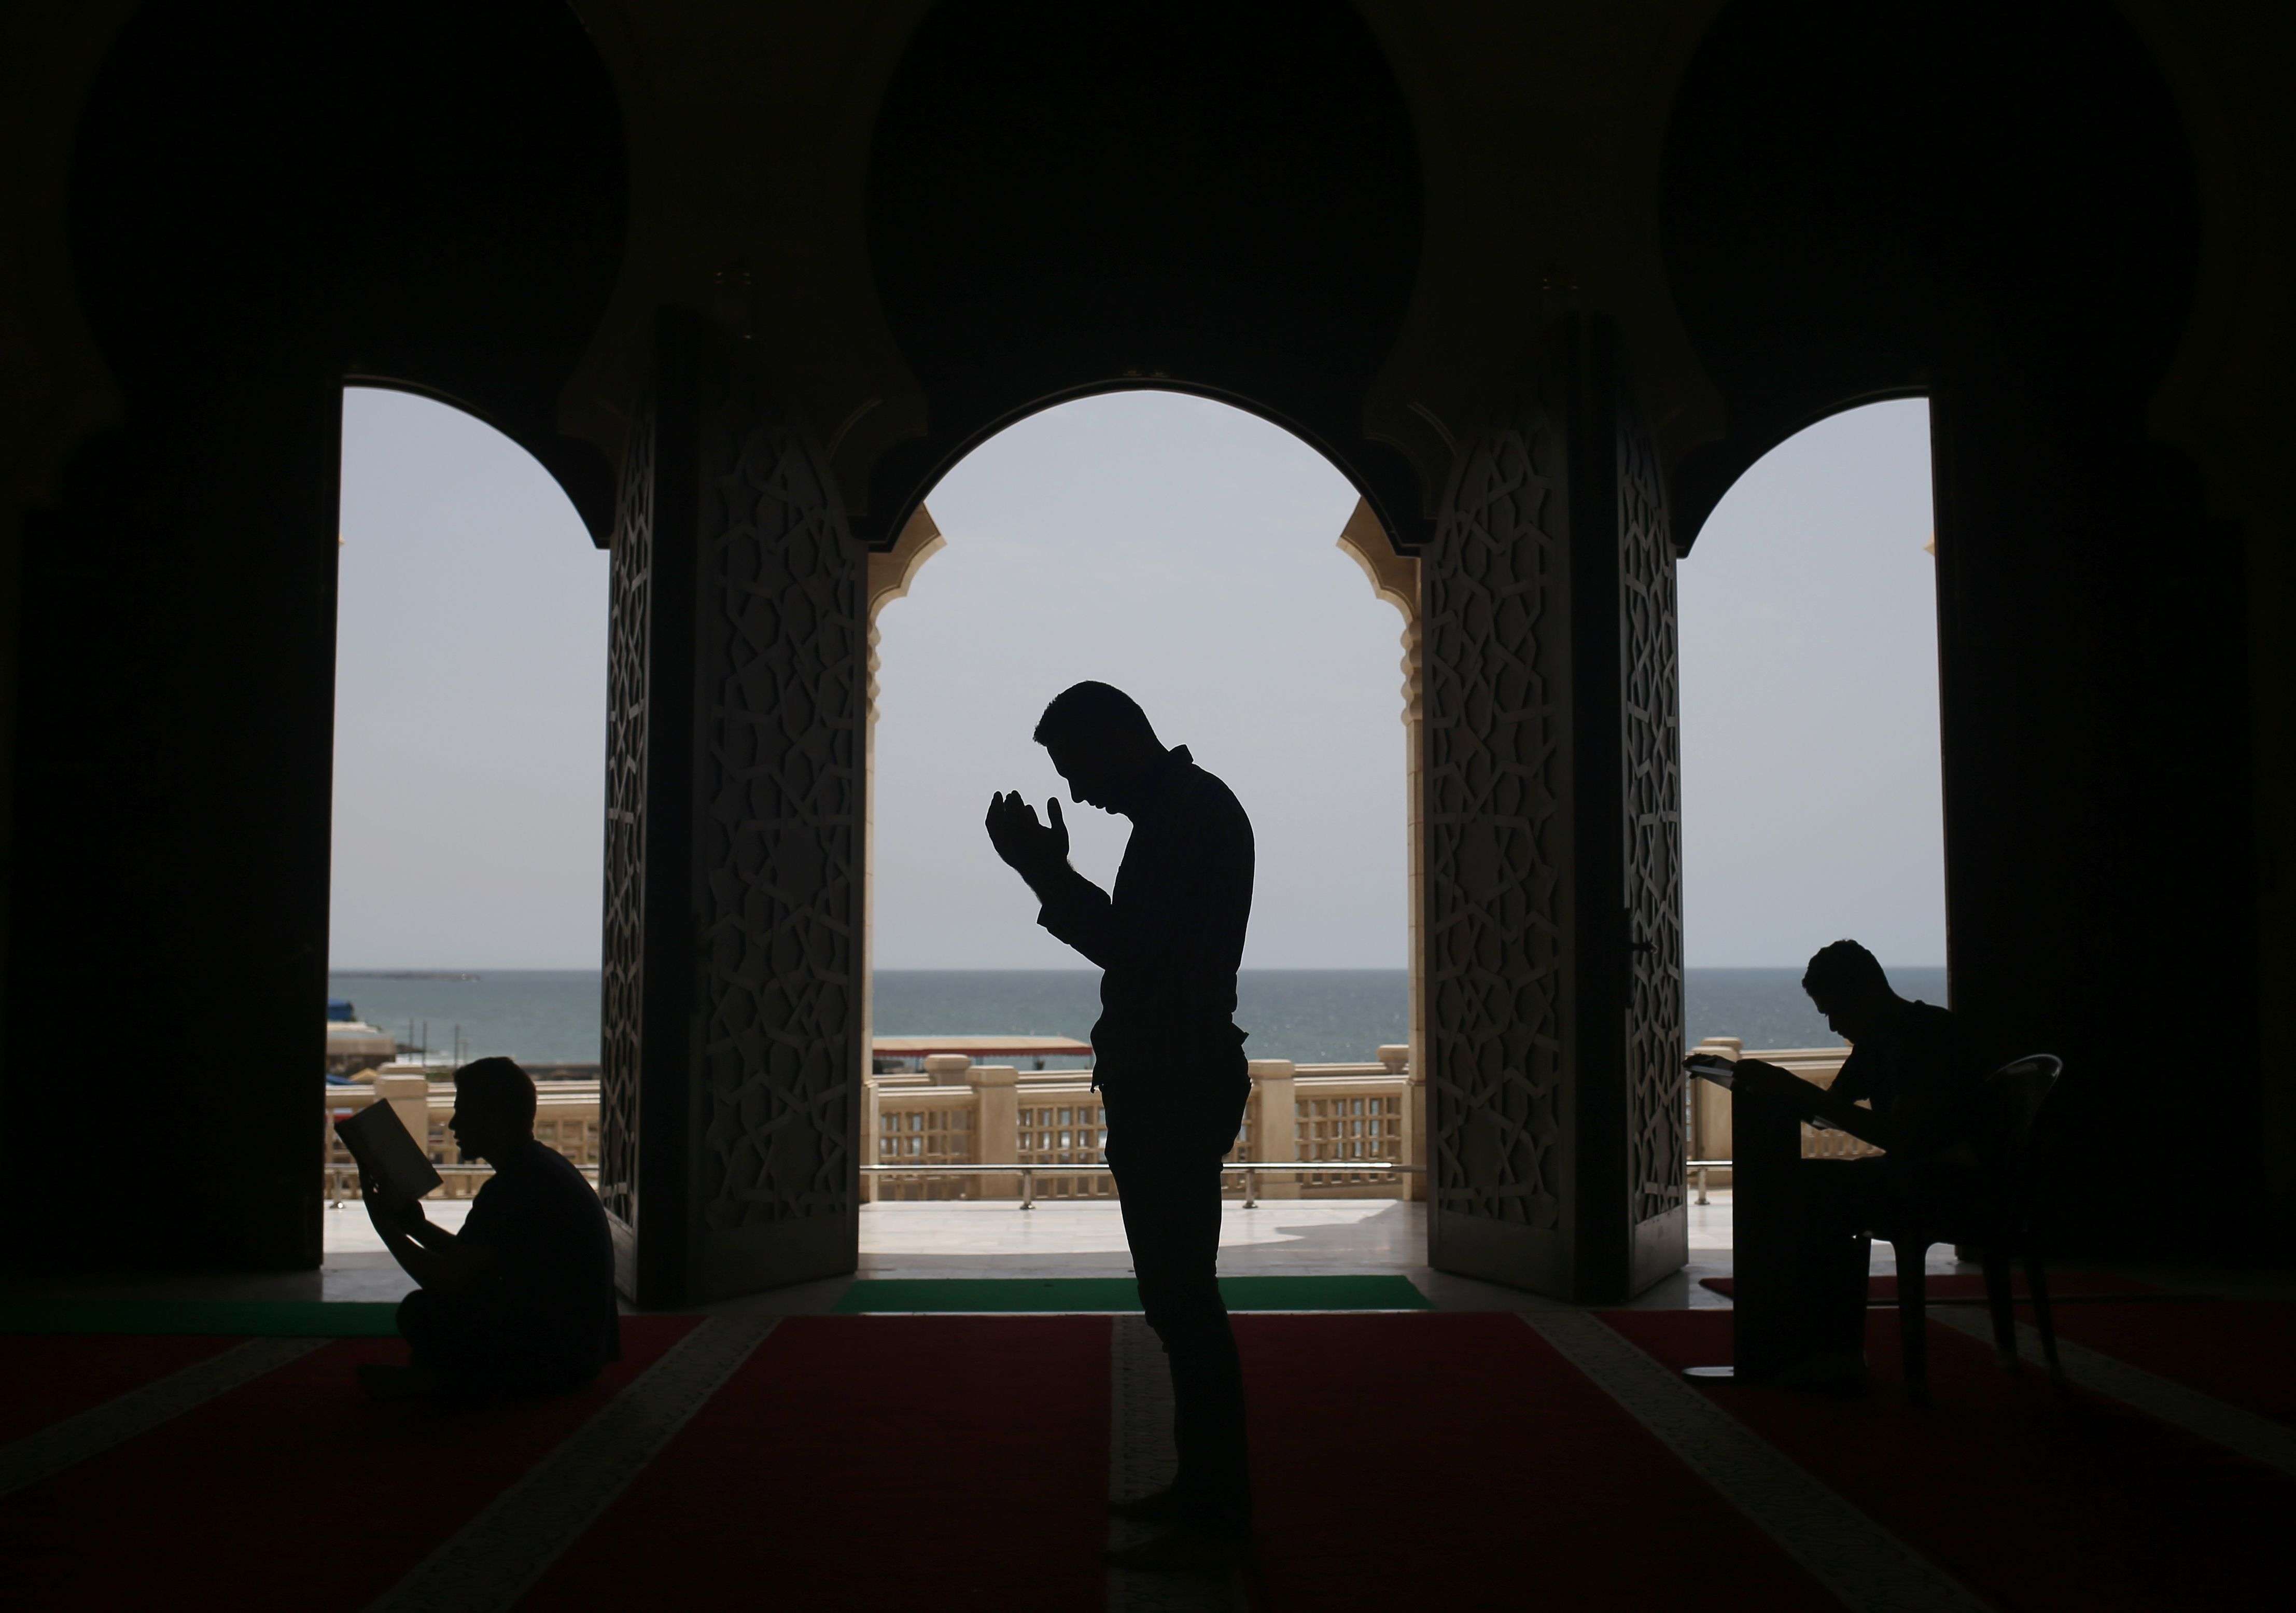 Palestinians pray at the al-Khaldi mosque in Gaza City on June 8, 2016 on the third day of the Muslim holy month of Ramadan.  Islamic authorities across much of the world -- from the most populous Muslim-majority country Indonesia to Saudi Arabia, home to the faith's holiest sites -- announced the start of the fasting month with the sighting of the crescent moon. Marking the divine revelation received by Islam's Prophet Mohammed, the month sees Muslim faithful abstain from eating, drinking, smoking and having sex from dawn to dusk. / AFP PHOTO / MOHAMMED ABED